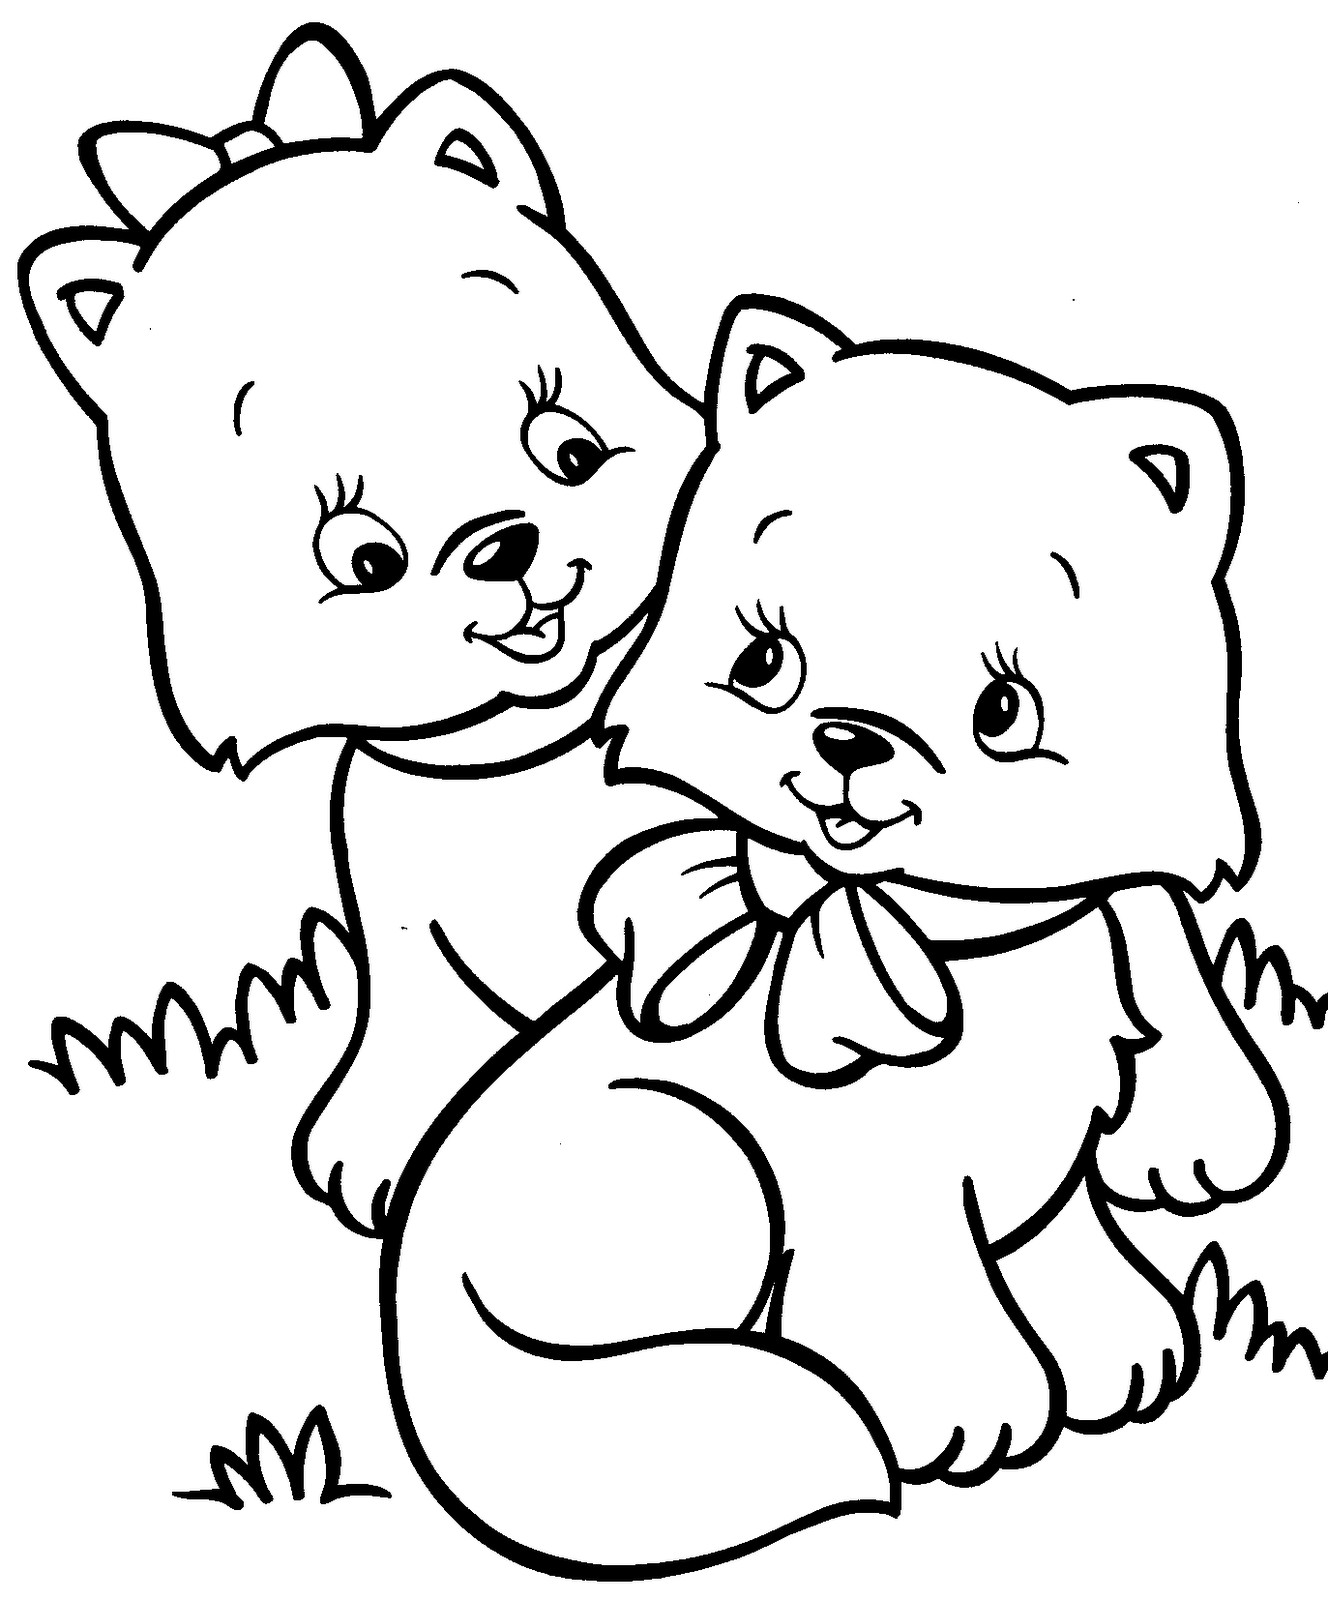 Kids Coloring Pages Cats
 Kitten Coloring Pages Best Coloring Pages For Kids